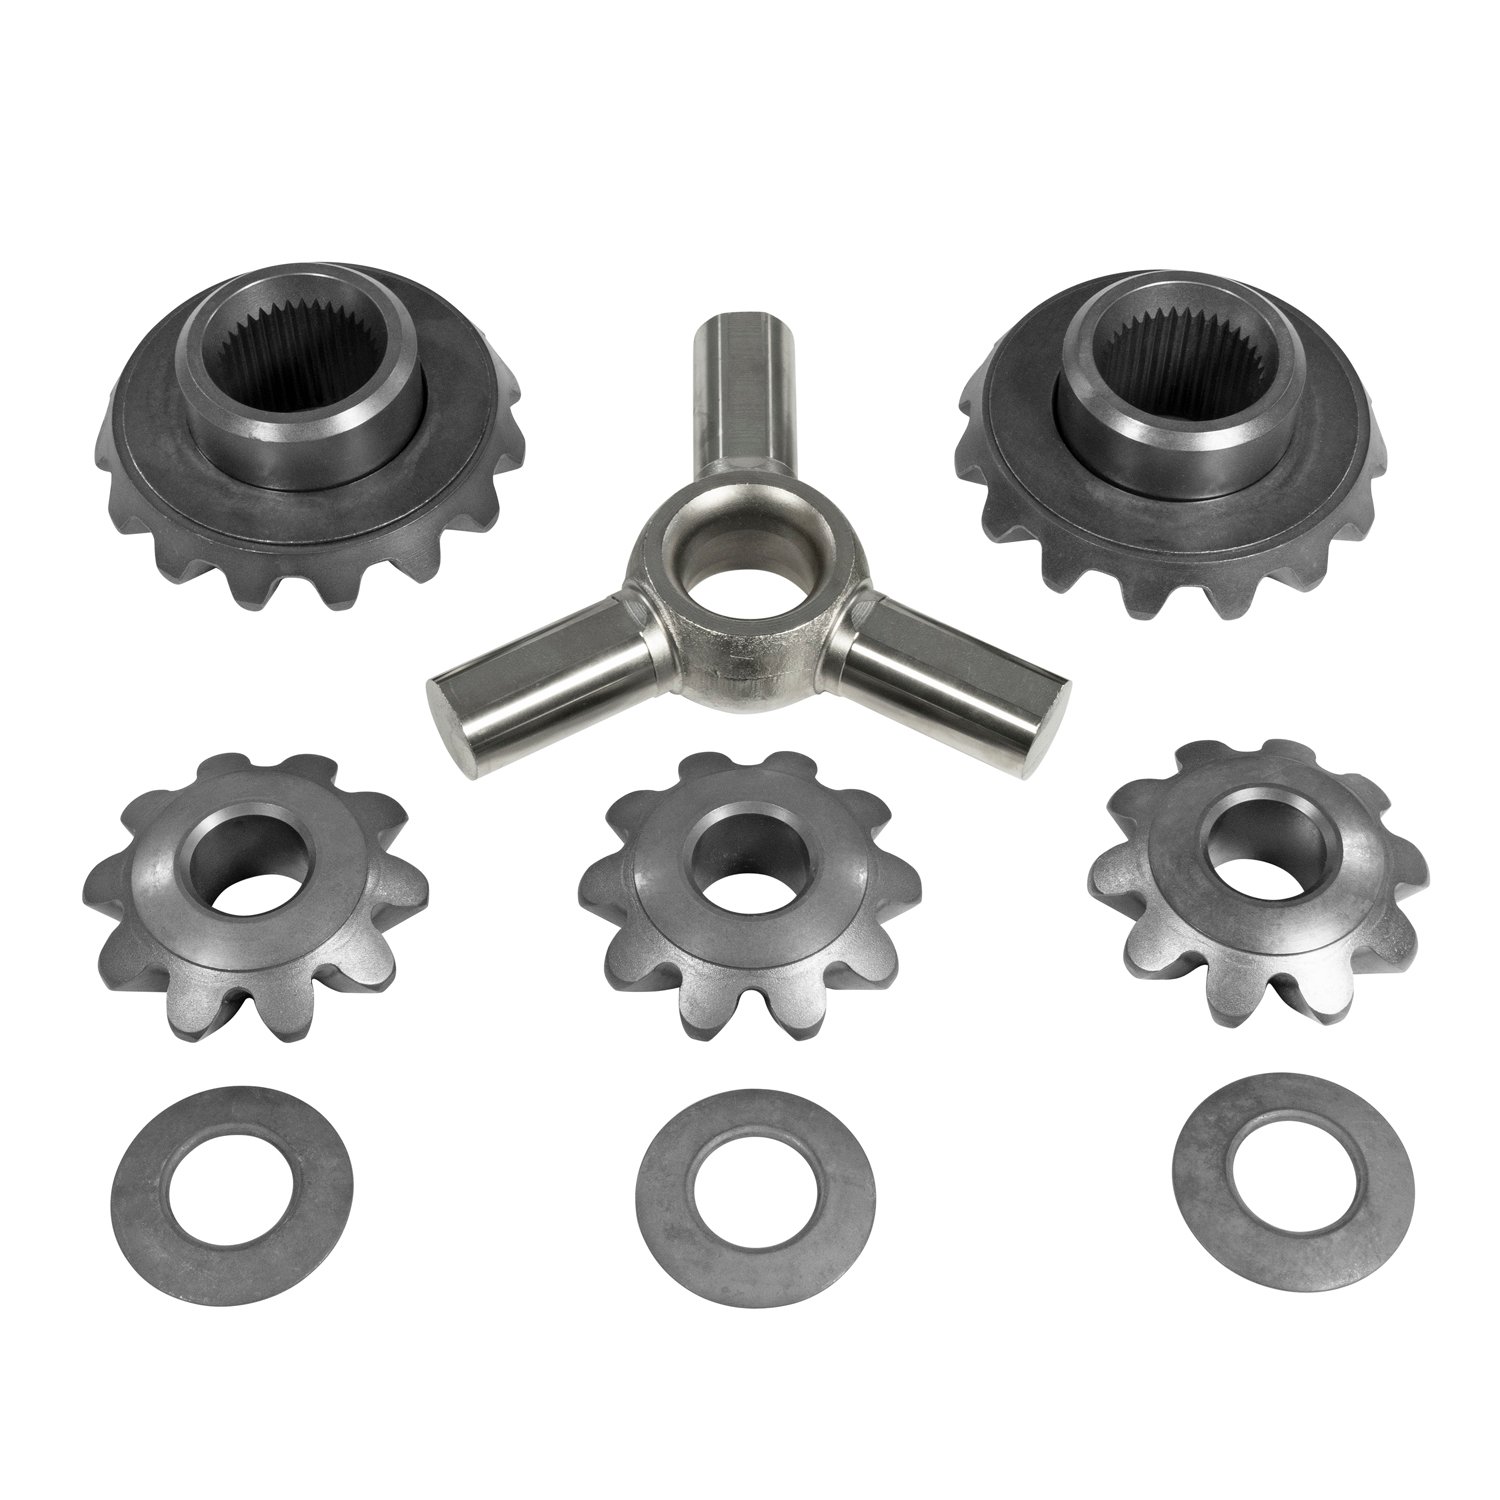 Spider Gear Kit For Ford 10.5 in. With